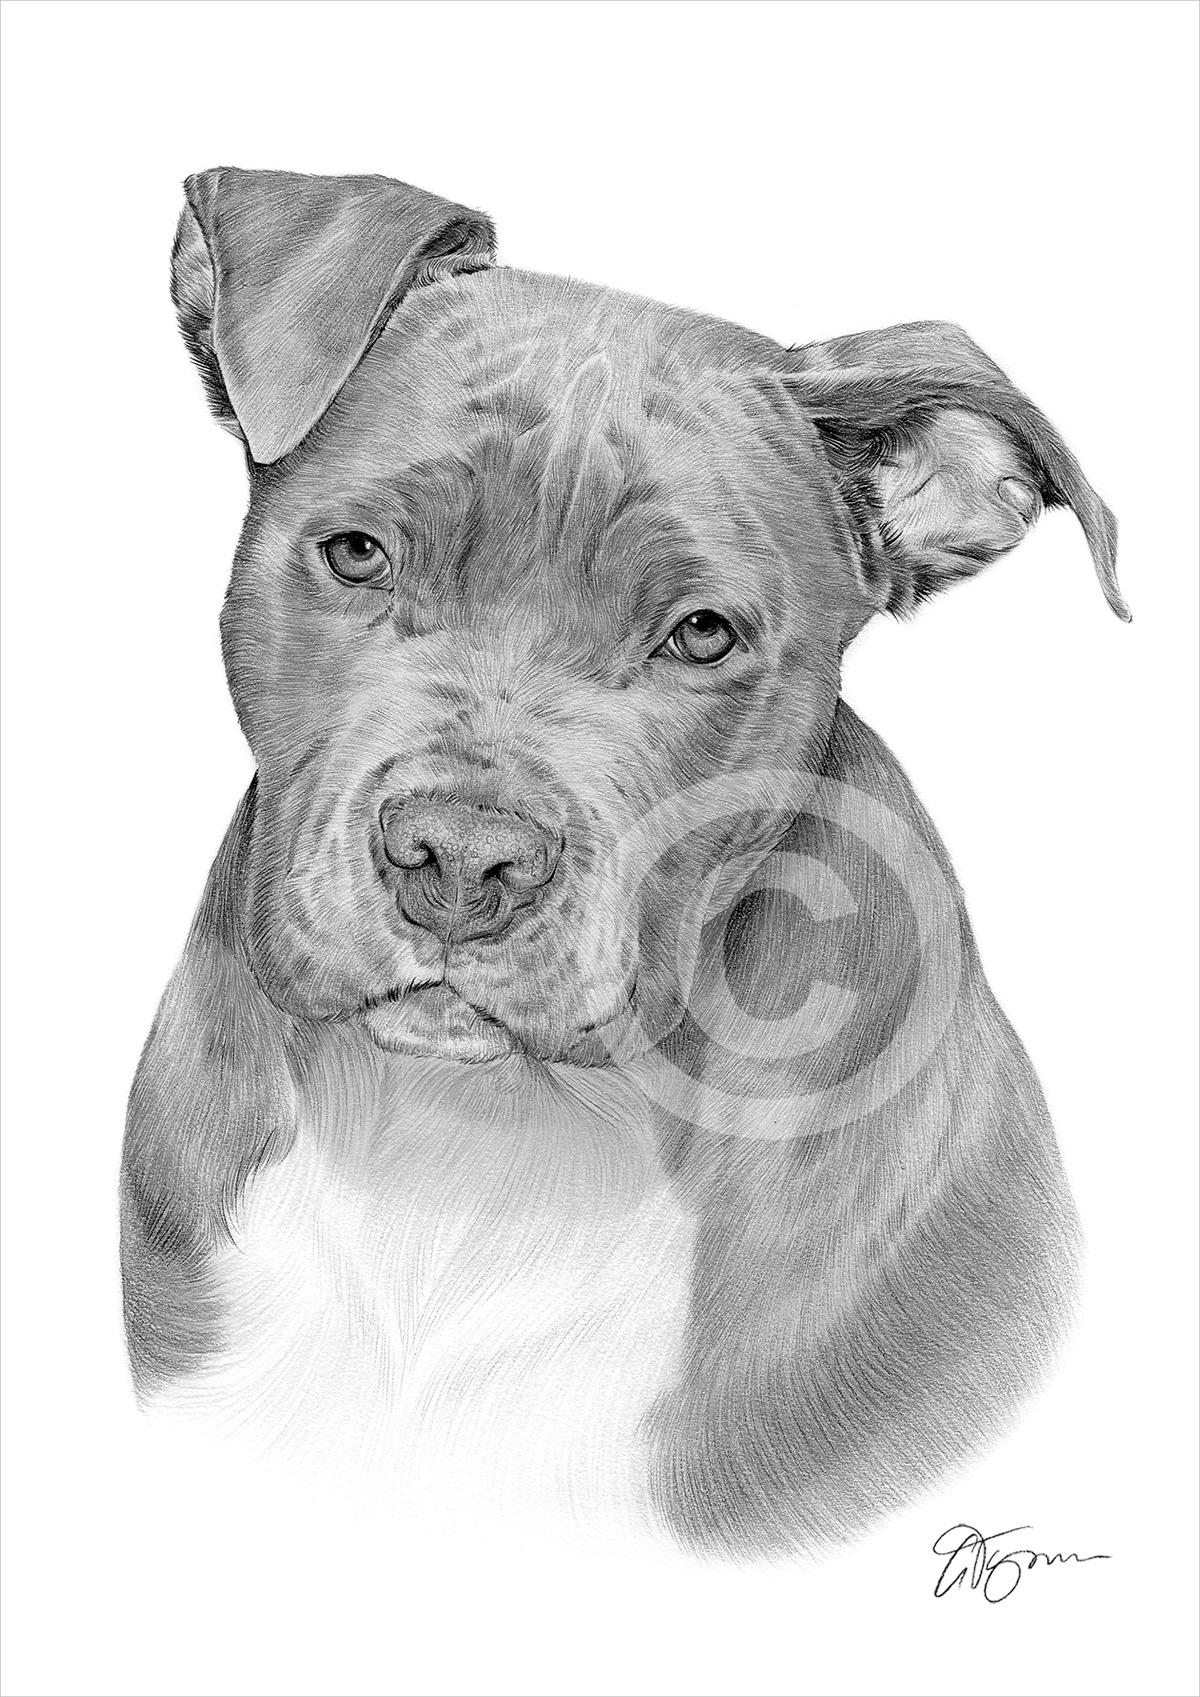 Pencil drawing of a pit bull terrier by UK artist Gary Tymon